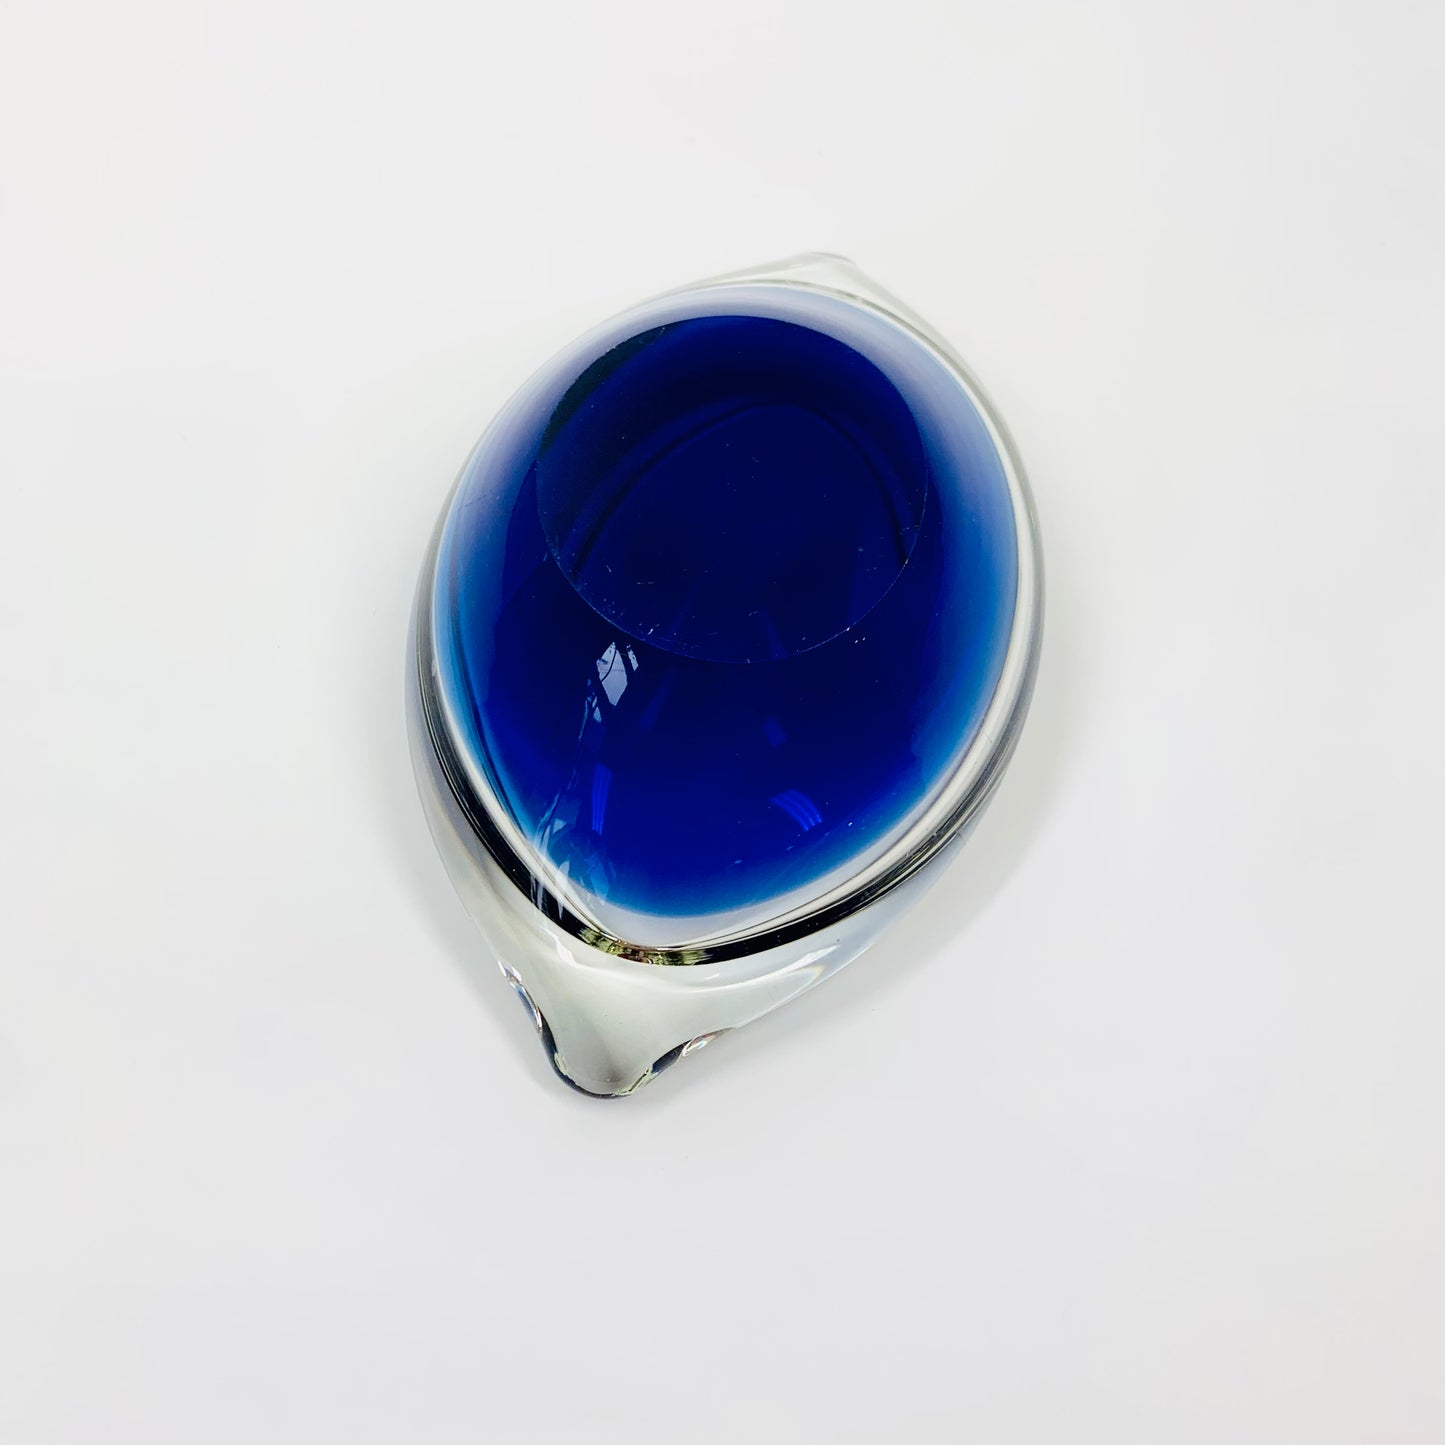 Stunning and rare 1960s Murano blue sommerso glass ashtray/bowl